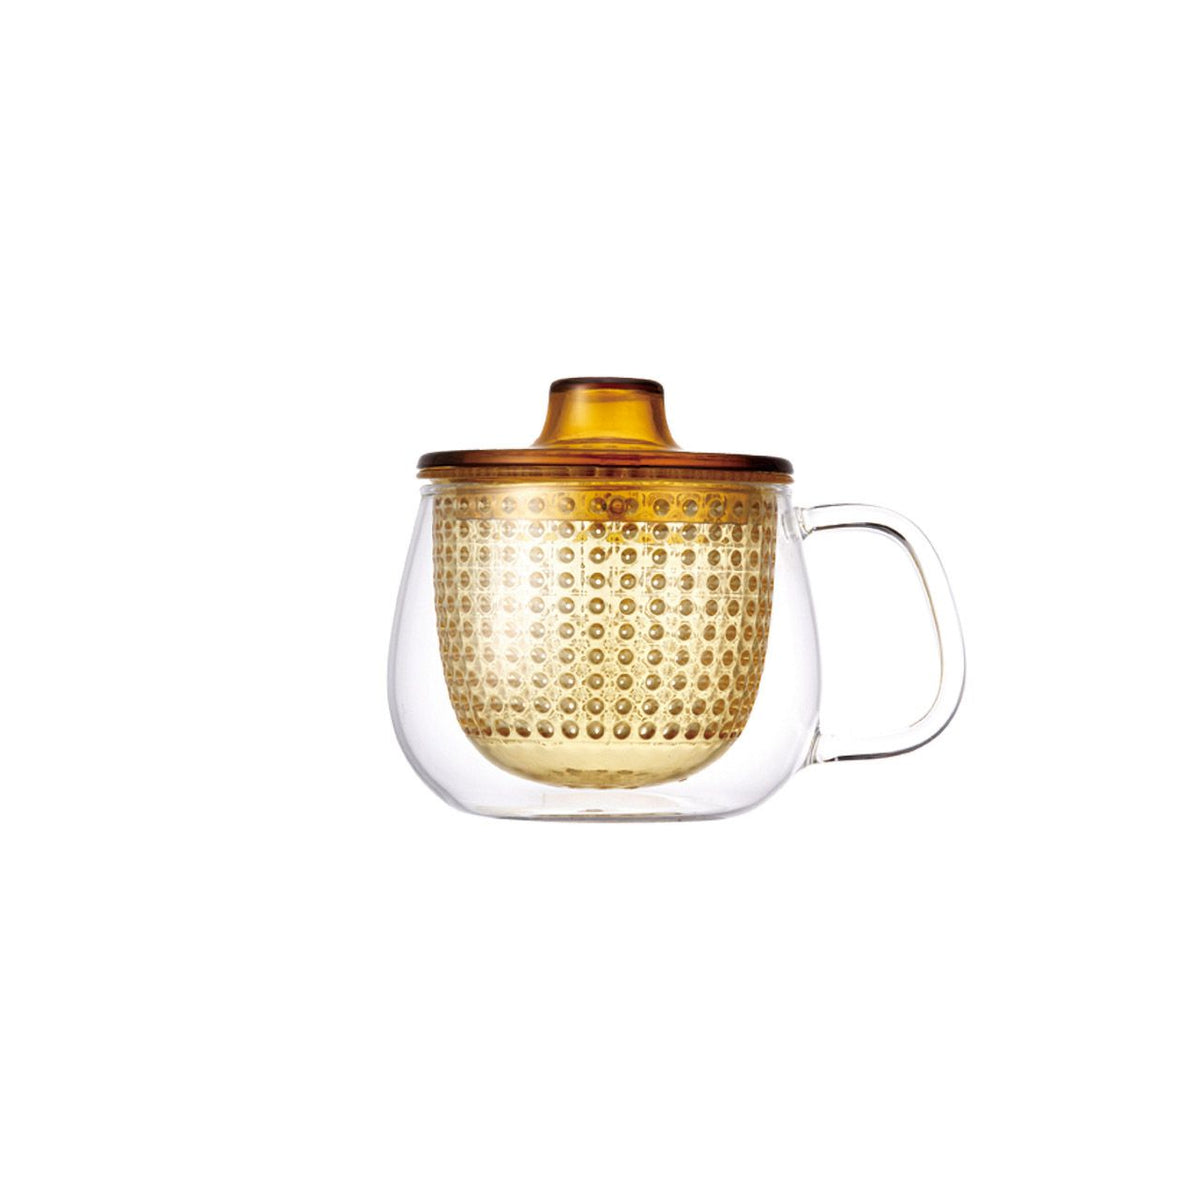 UNIMUG glass teapot in  yellow for loose leaf tea by The Rabbit Hole